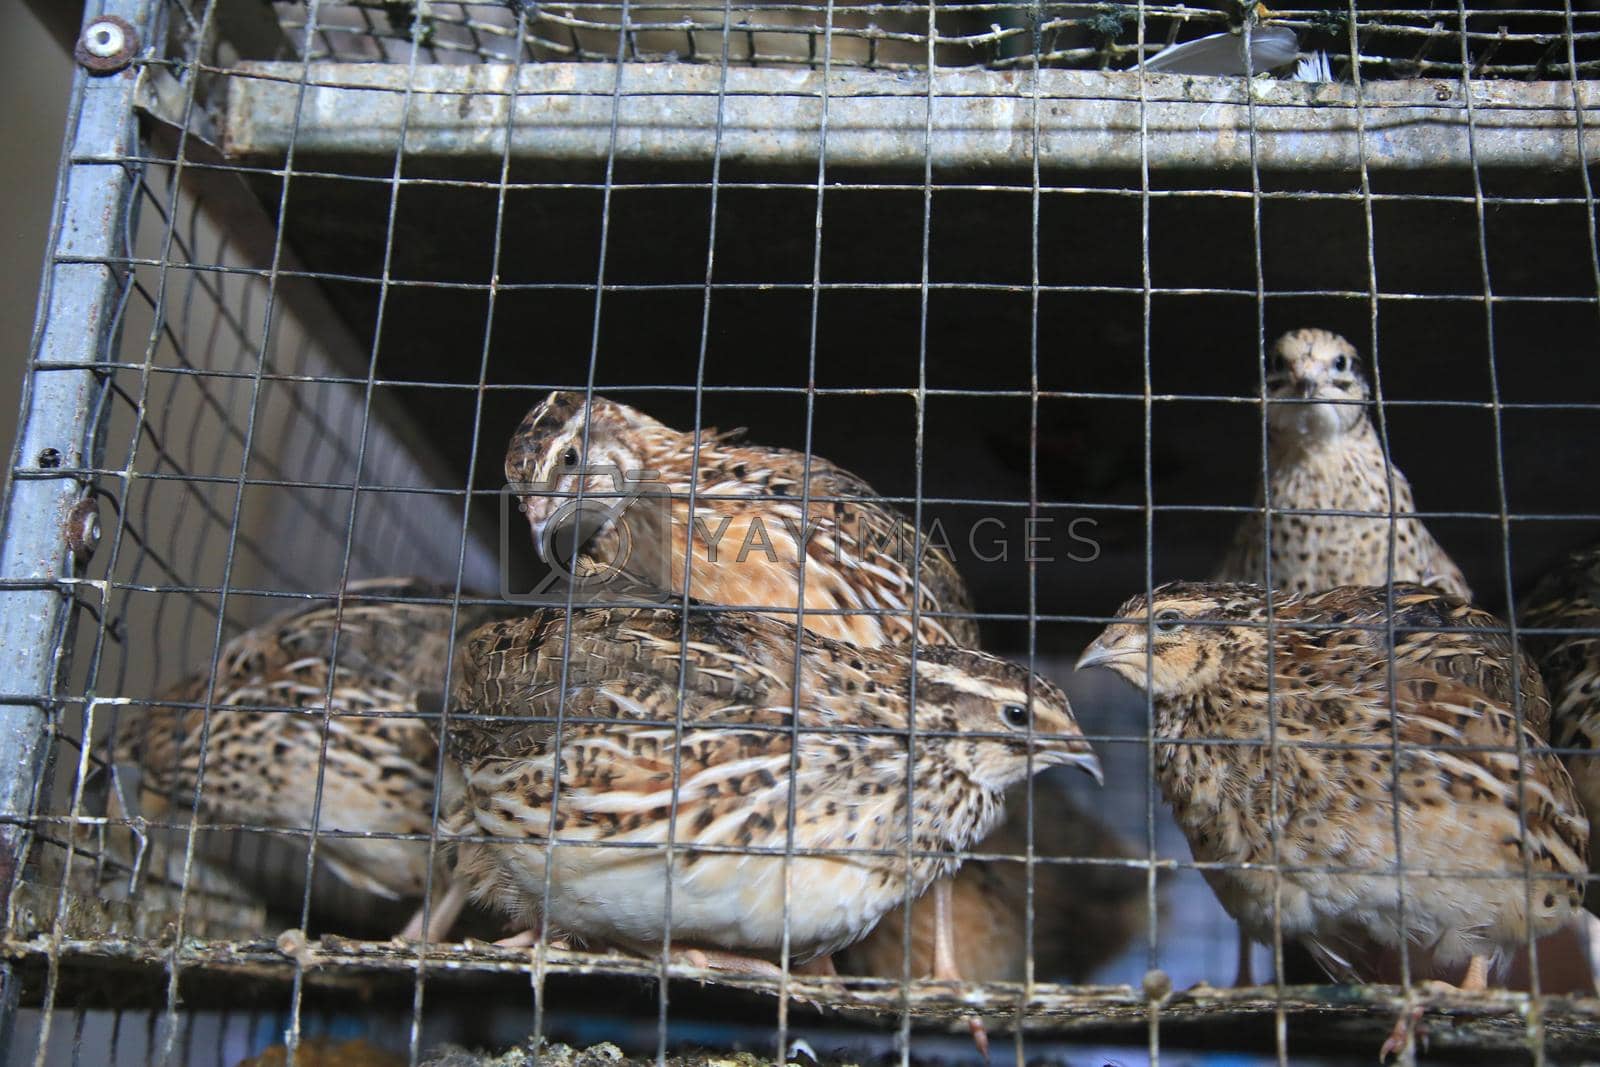 Royalty free image of quail bird in cage by joasouza